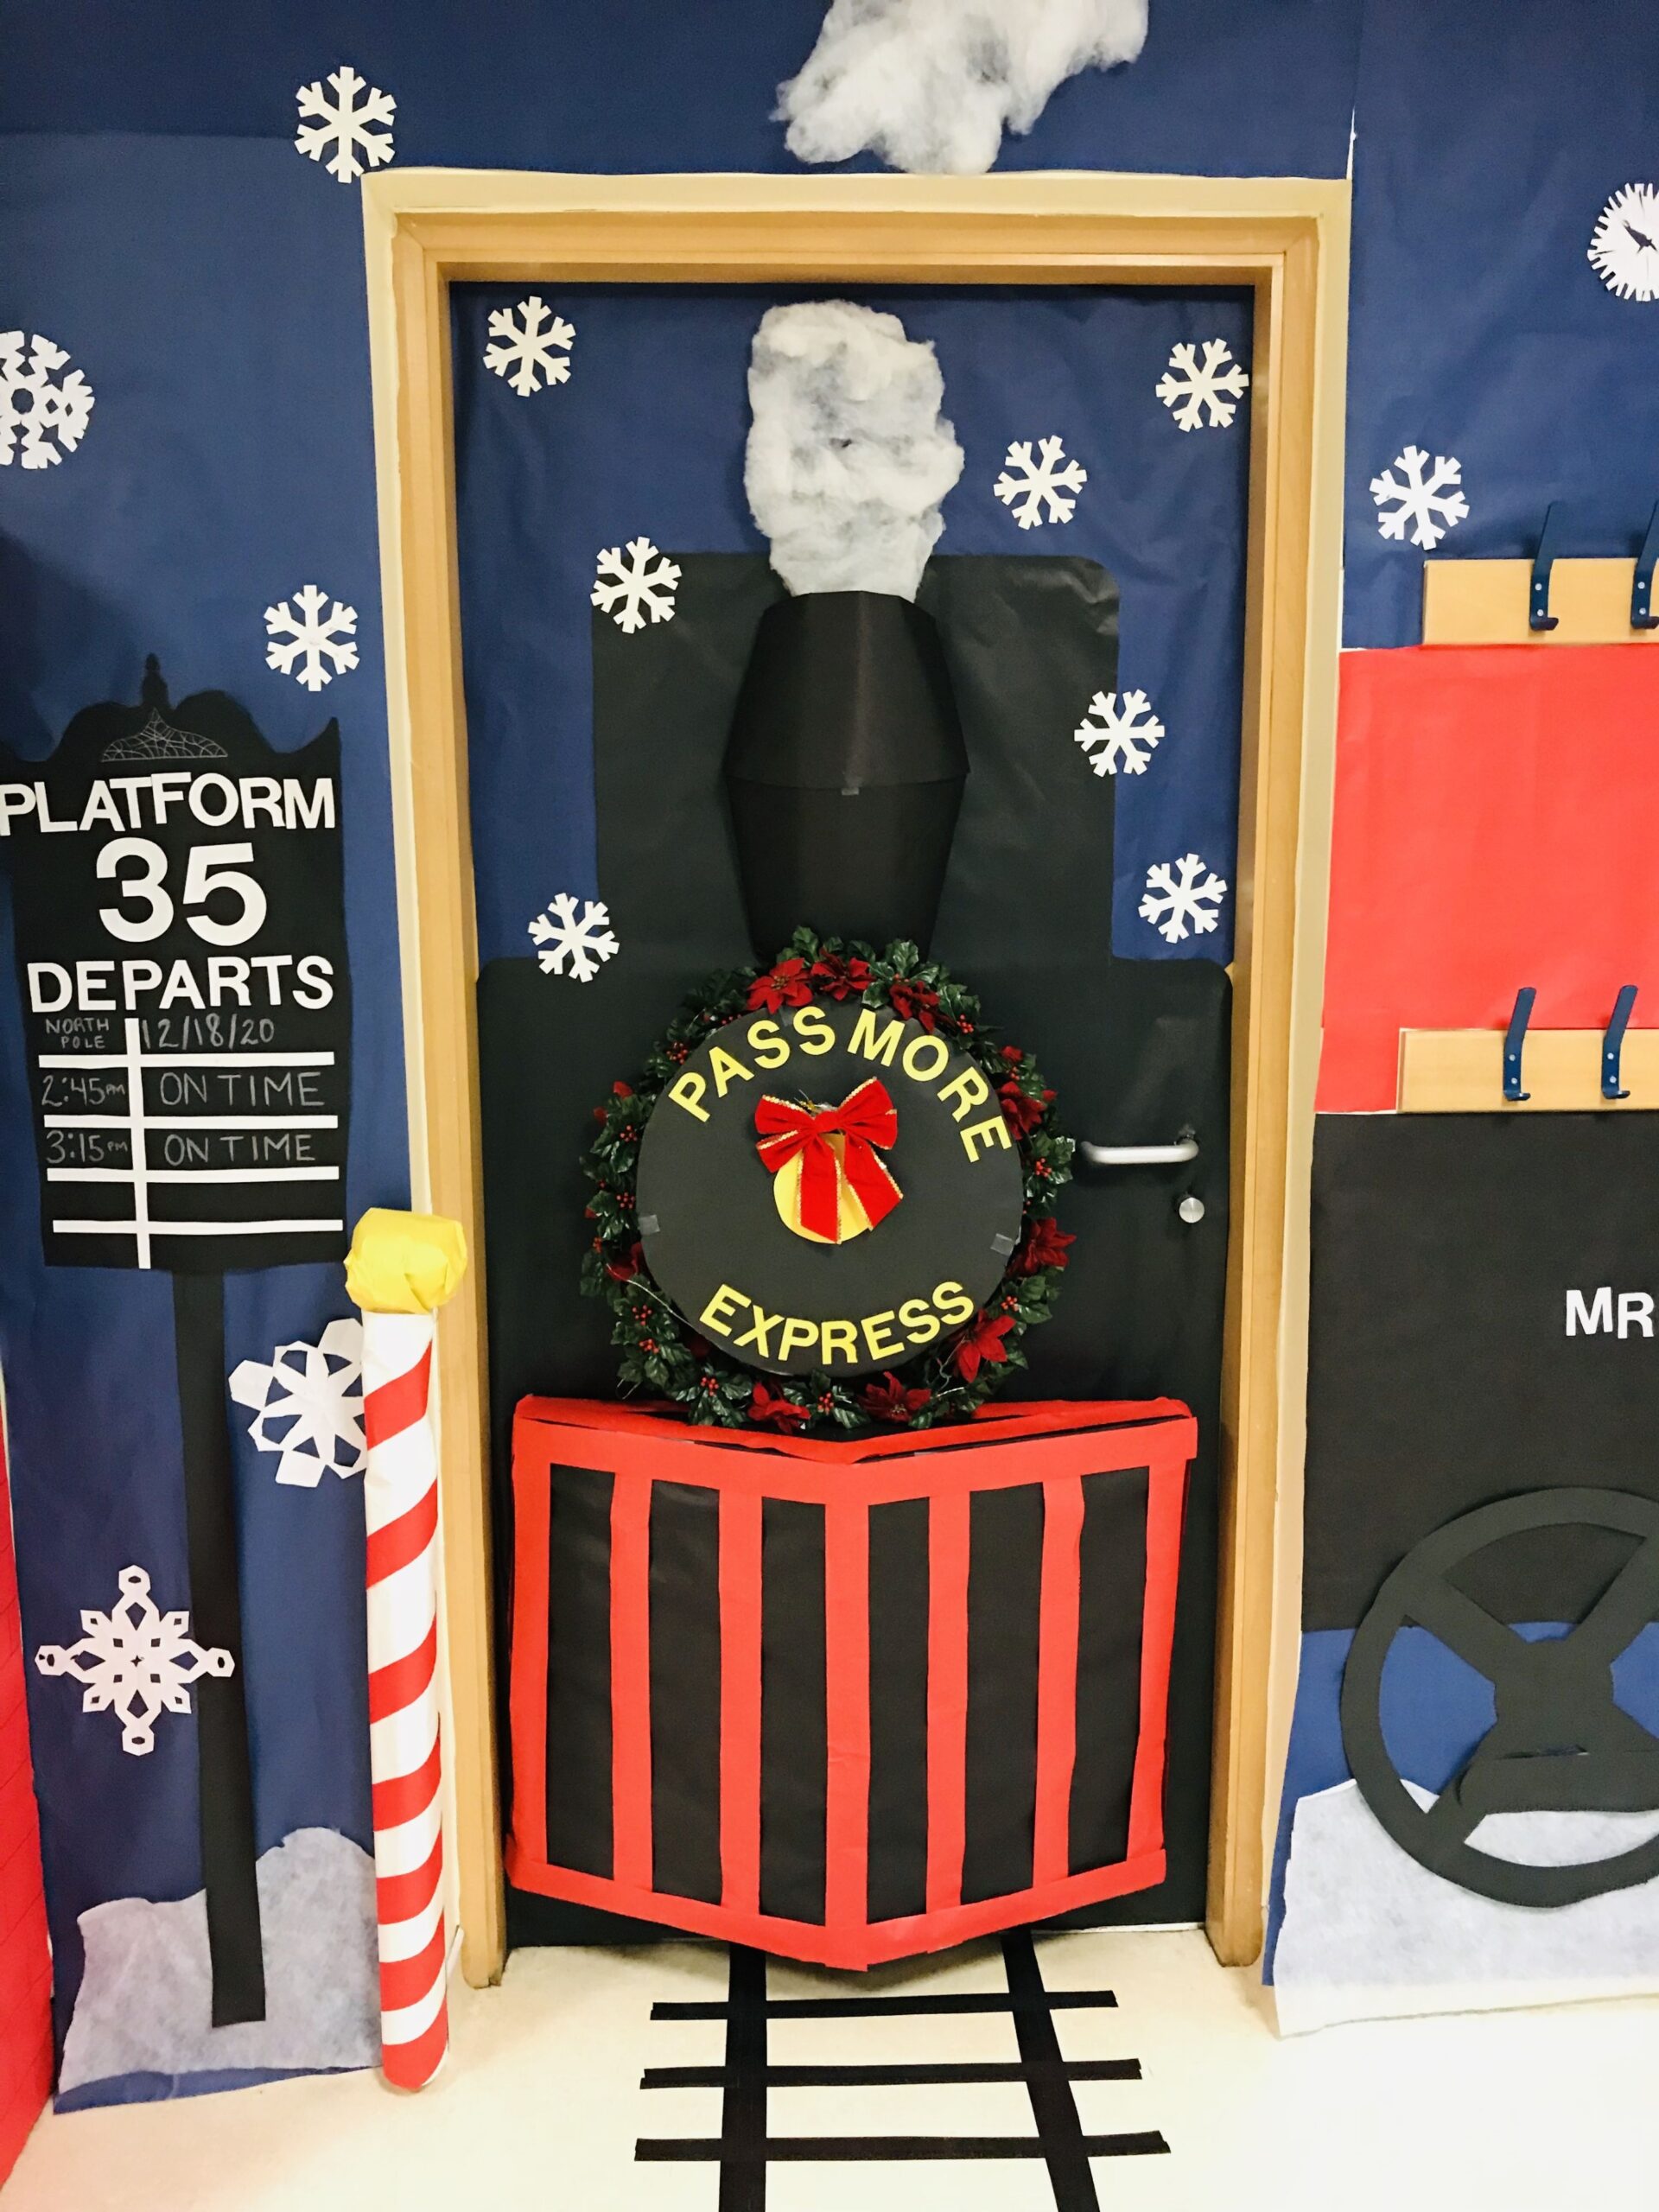 Get On Board With Festive Door Decorations Polar Express Style!